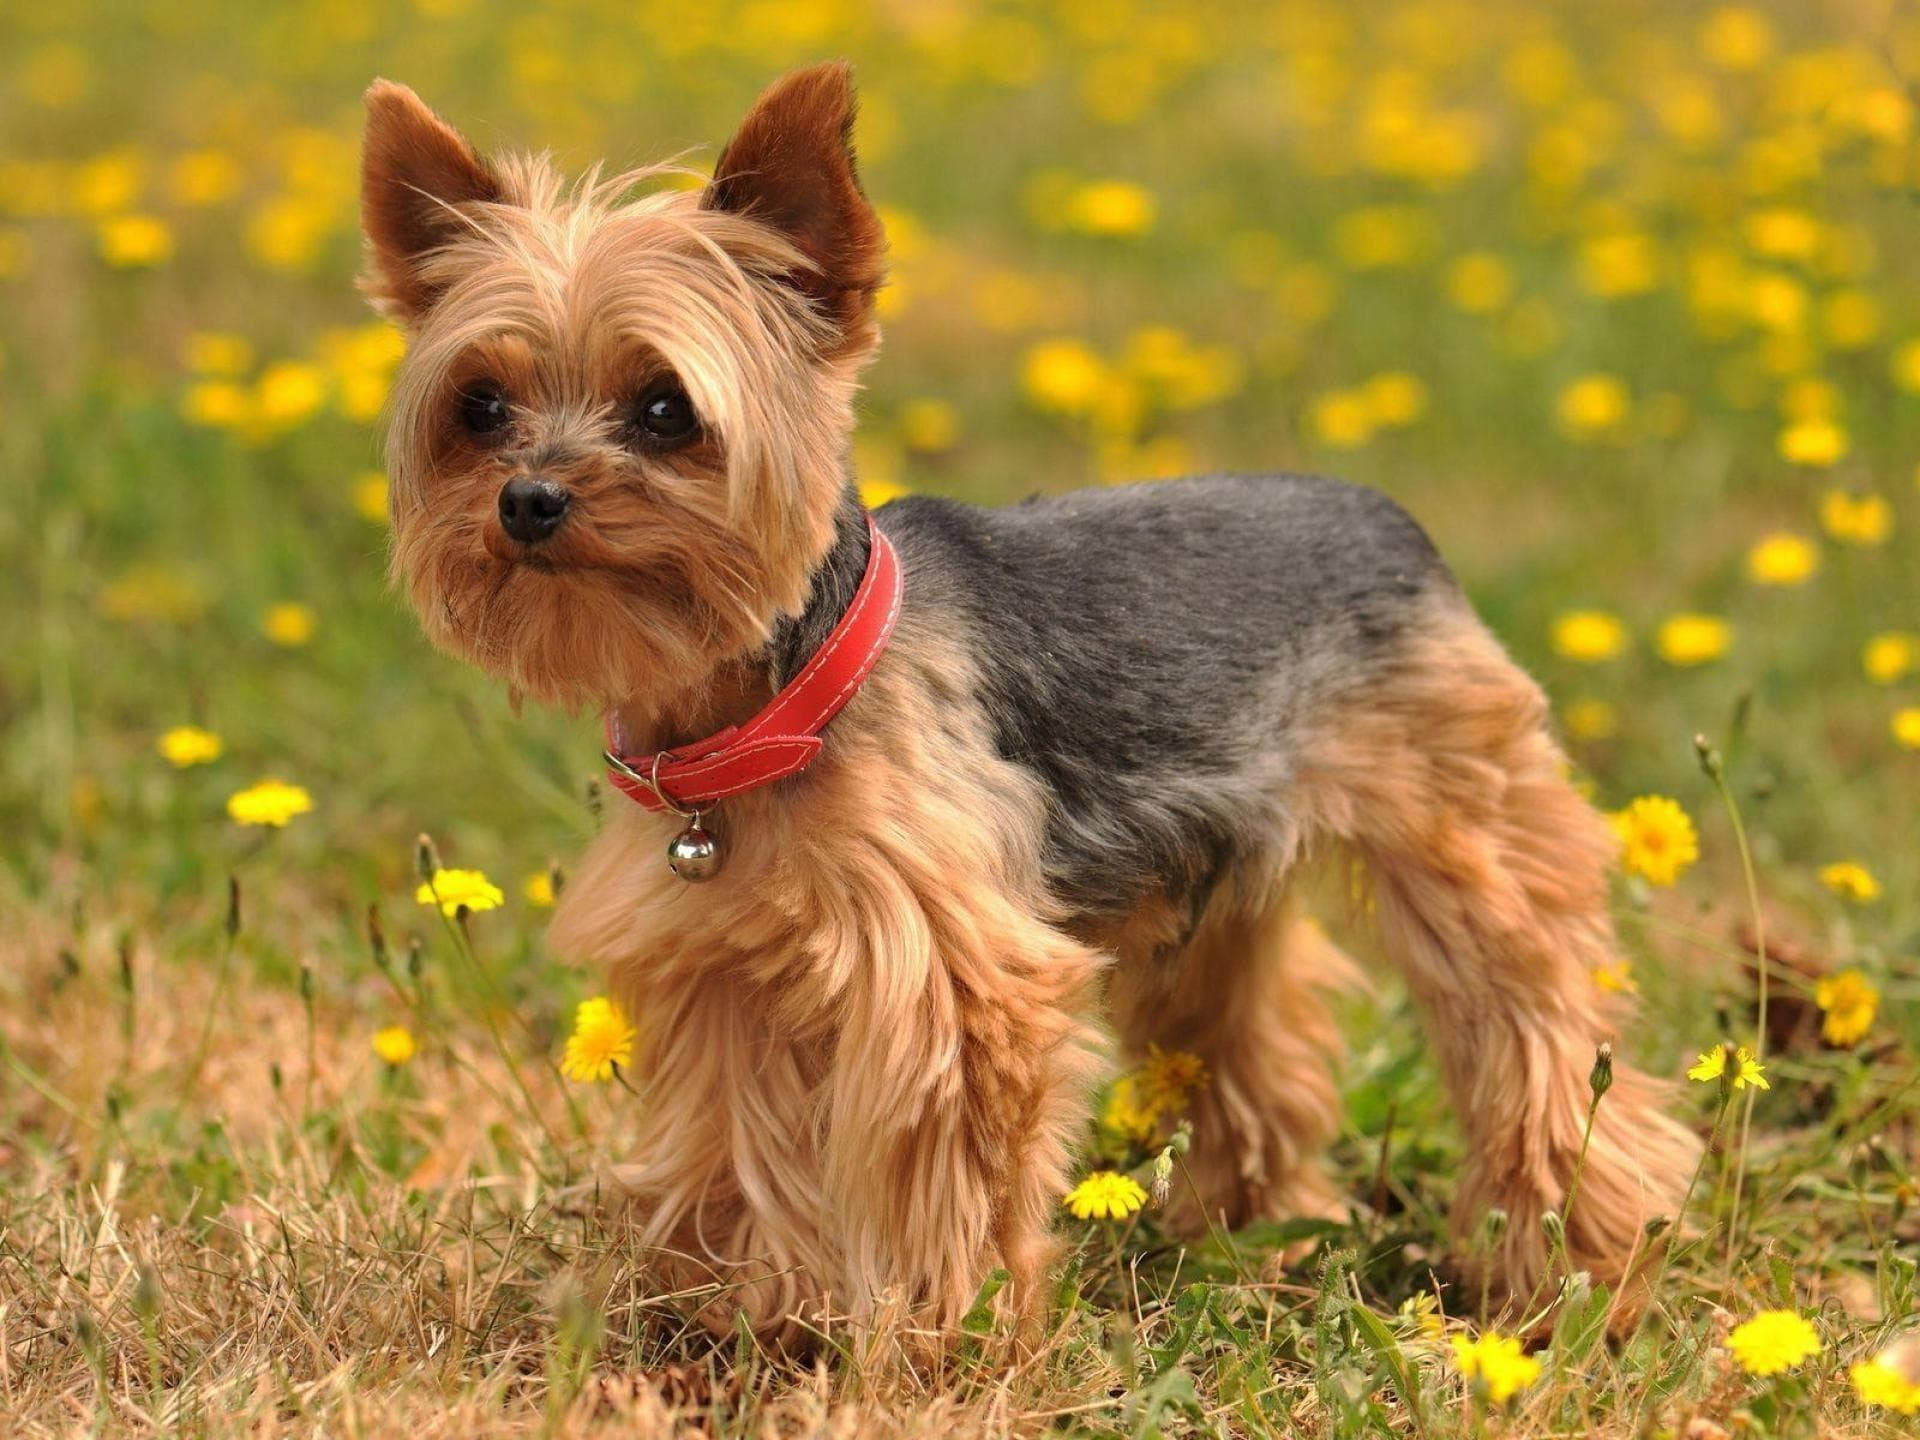 Yorkie Puppy On Yellow Flowers Background